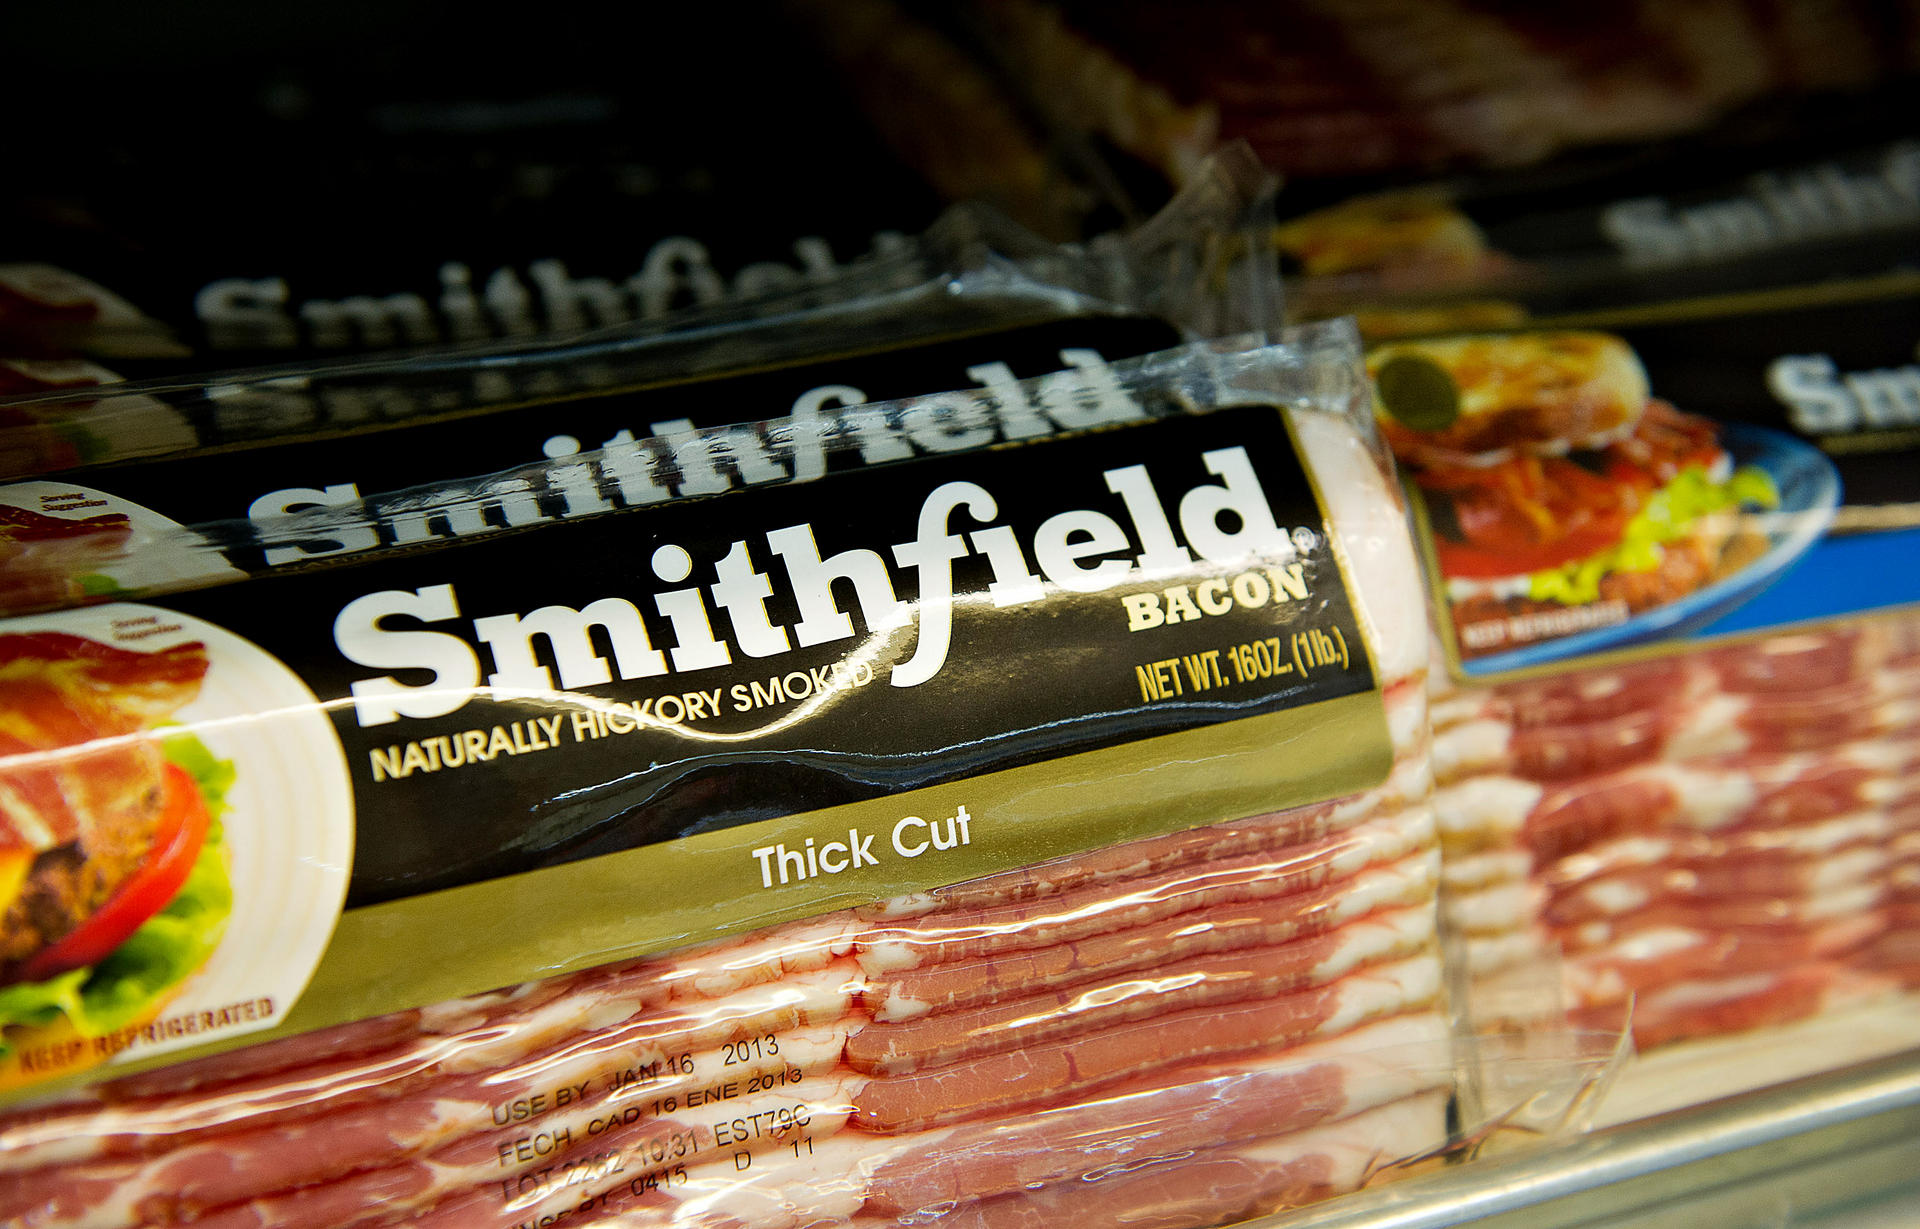 Starboard believes Smithfield is being sold too cheaply.